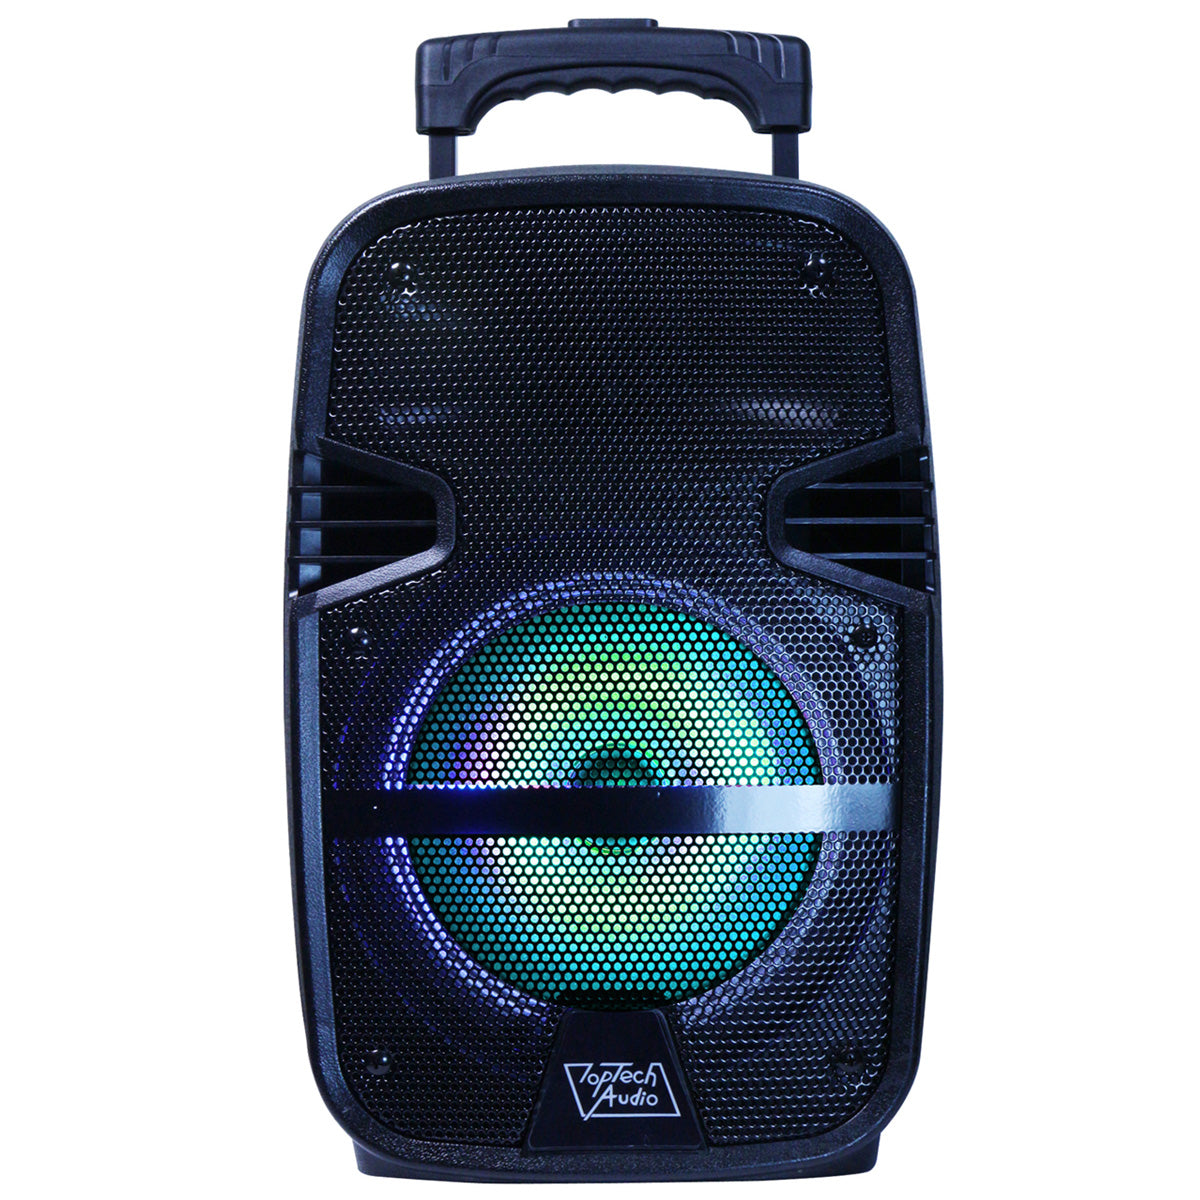 Fully Amplified Portable 2500 Watts Peak Power 15” Speaker with LED LIGHT